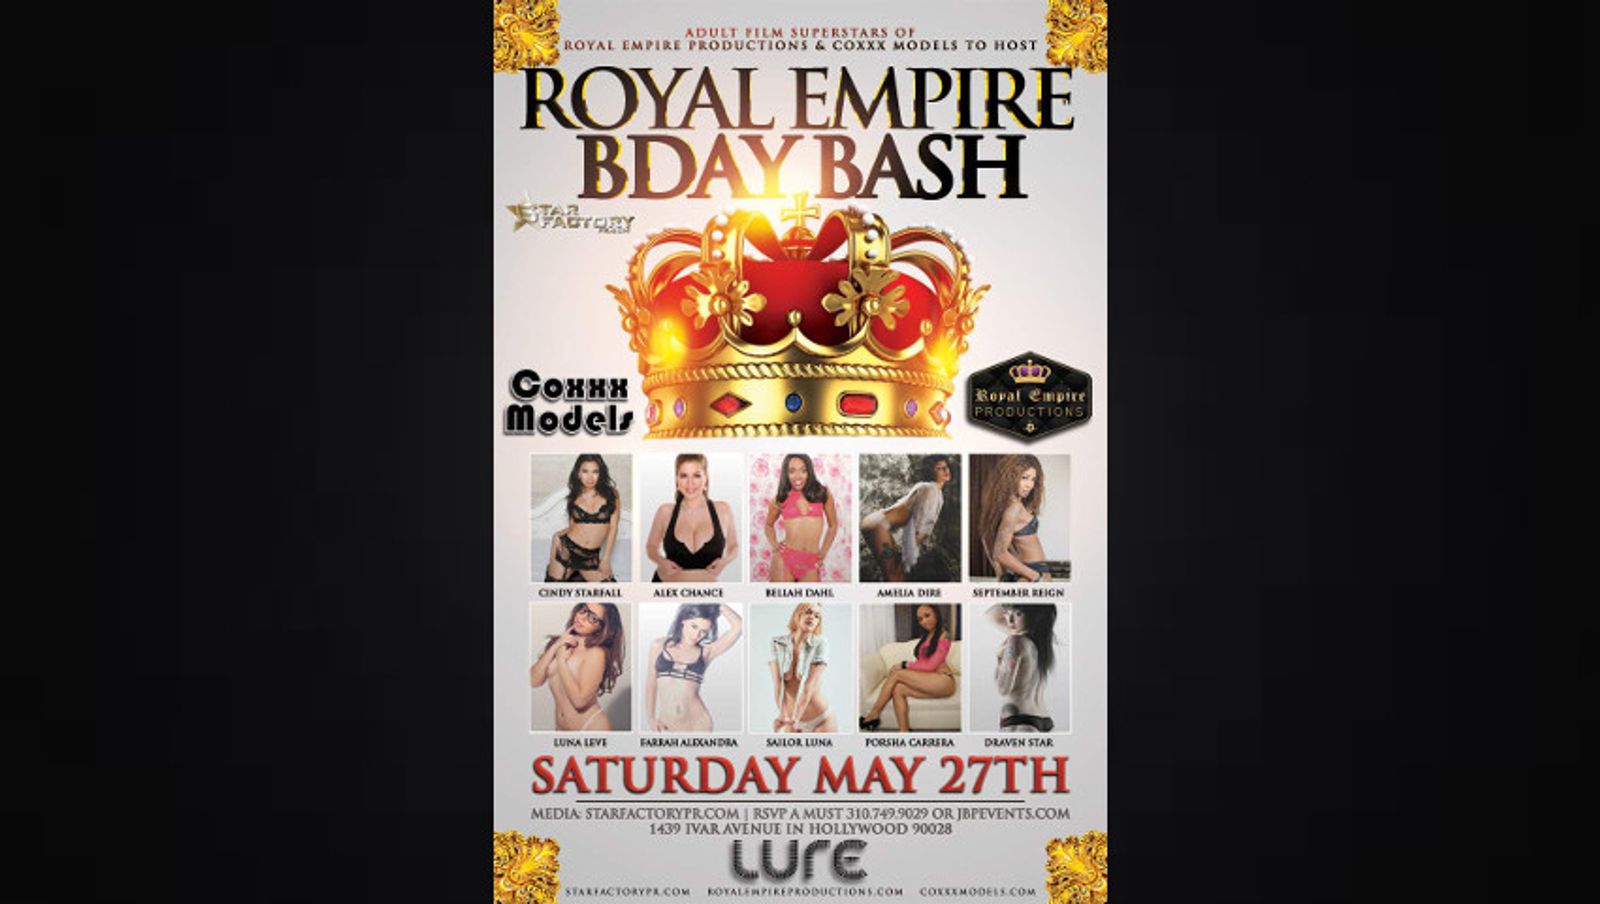 Porn Stars to Host Birthday Party for Royal Empire Owner